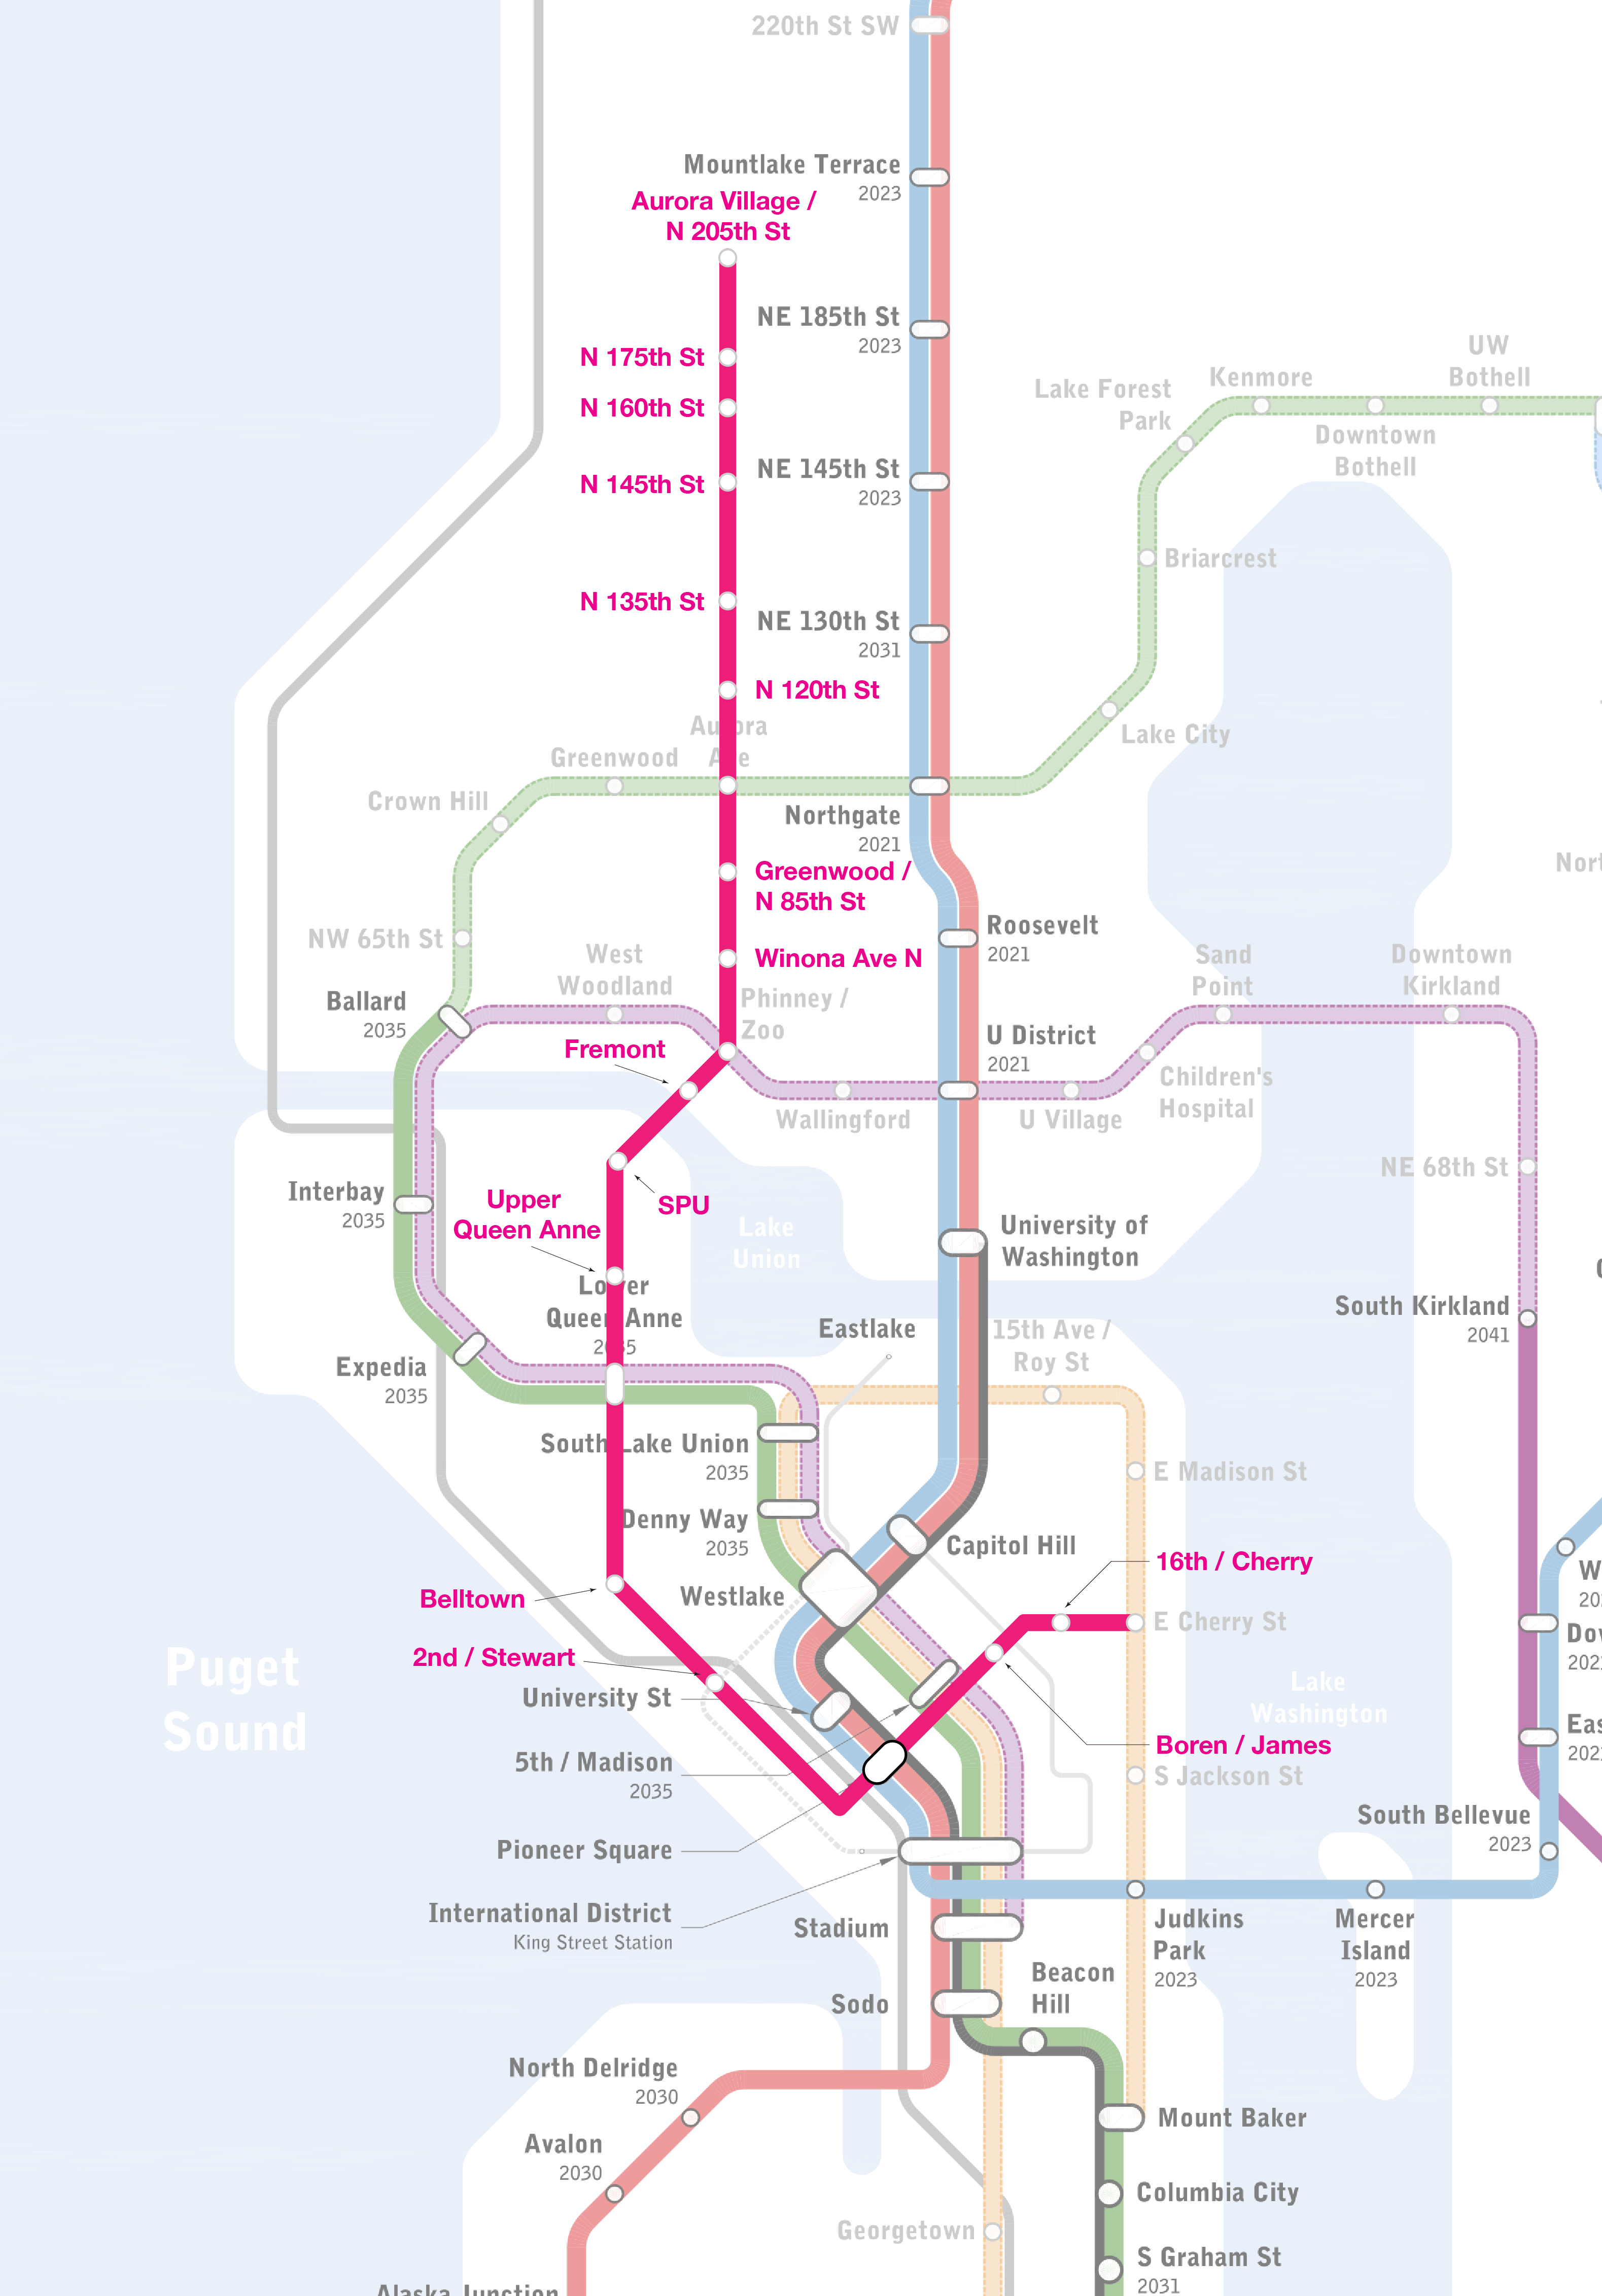 The E alignment is highlighted in hot pink. (Doug Trumm / Seattle Subway)